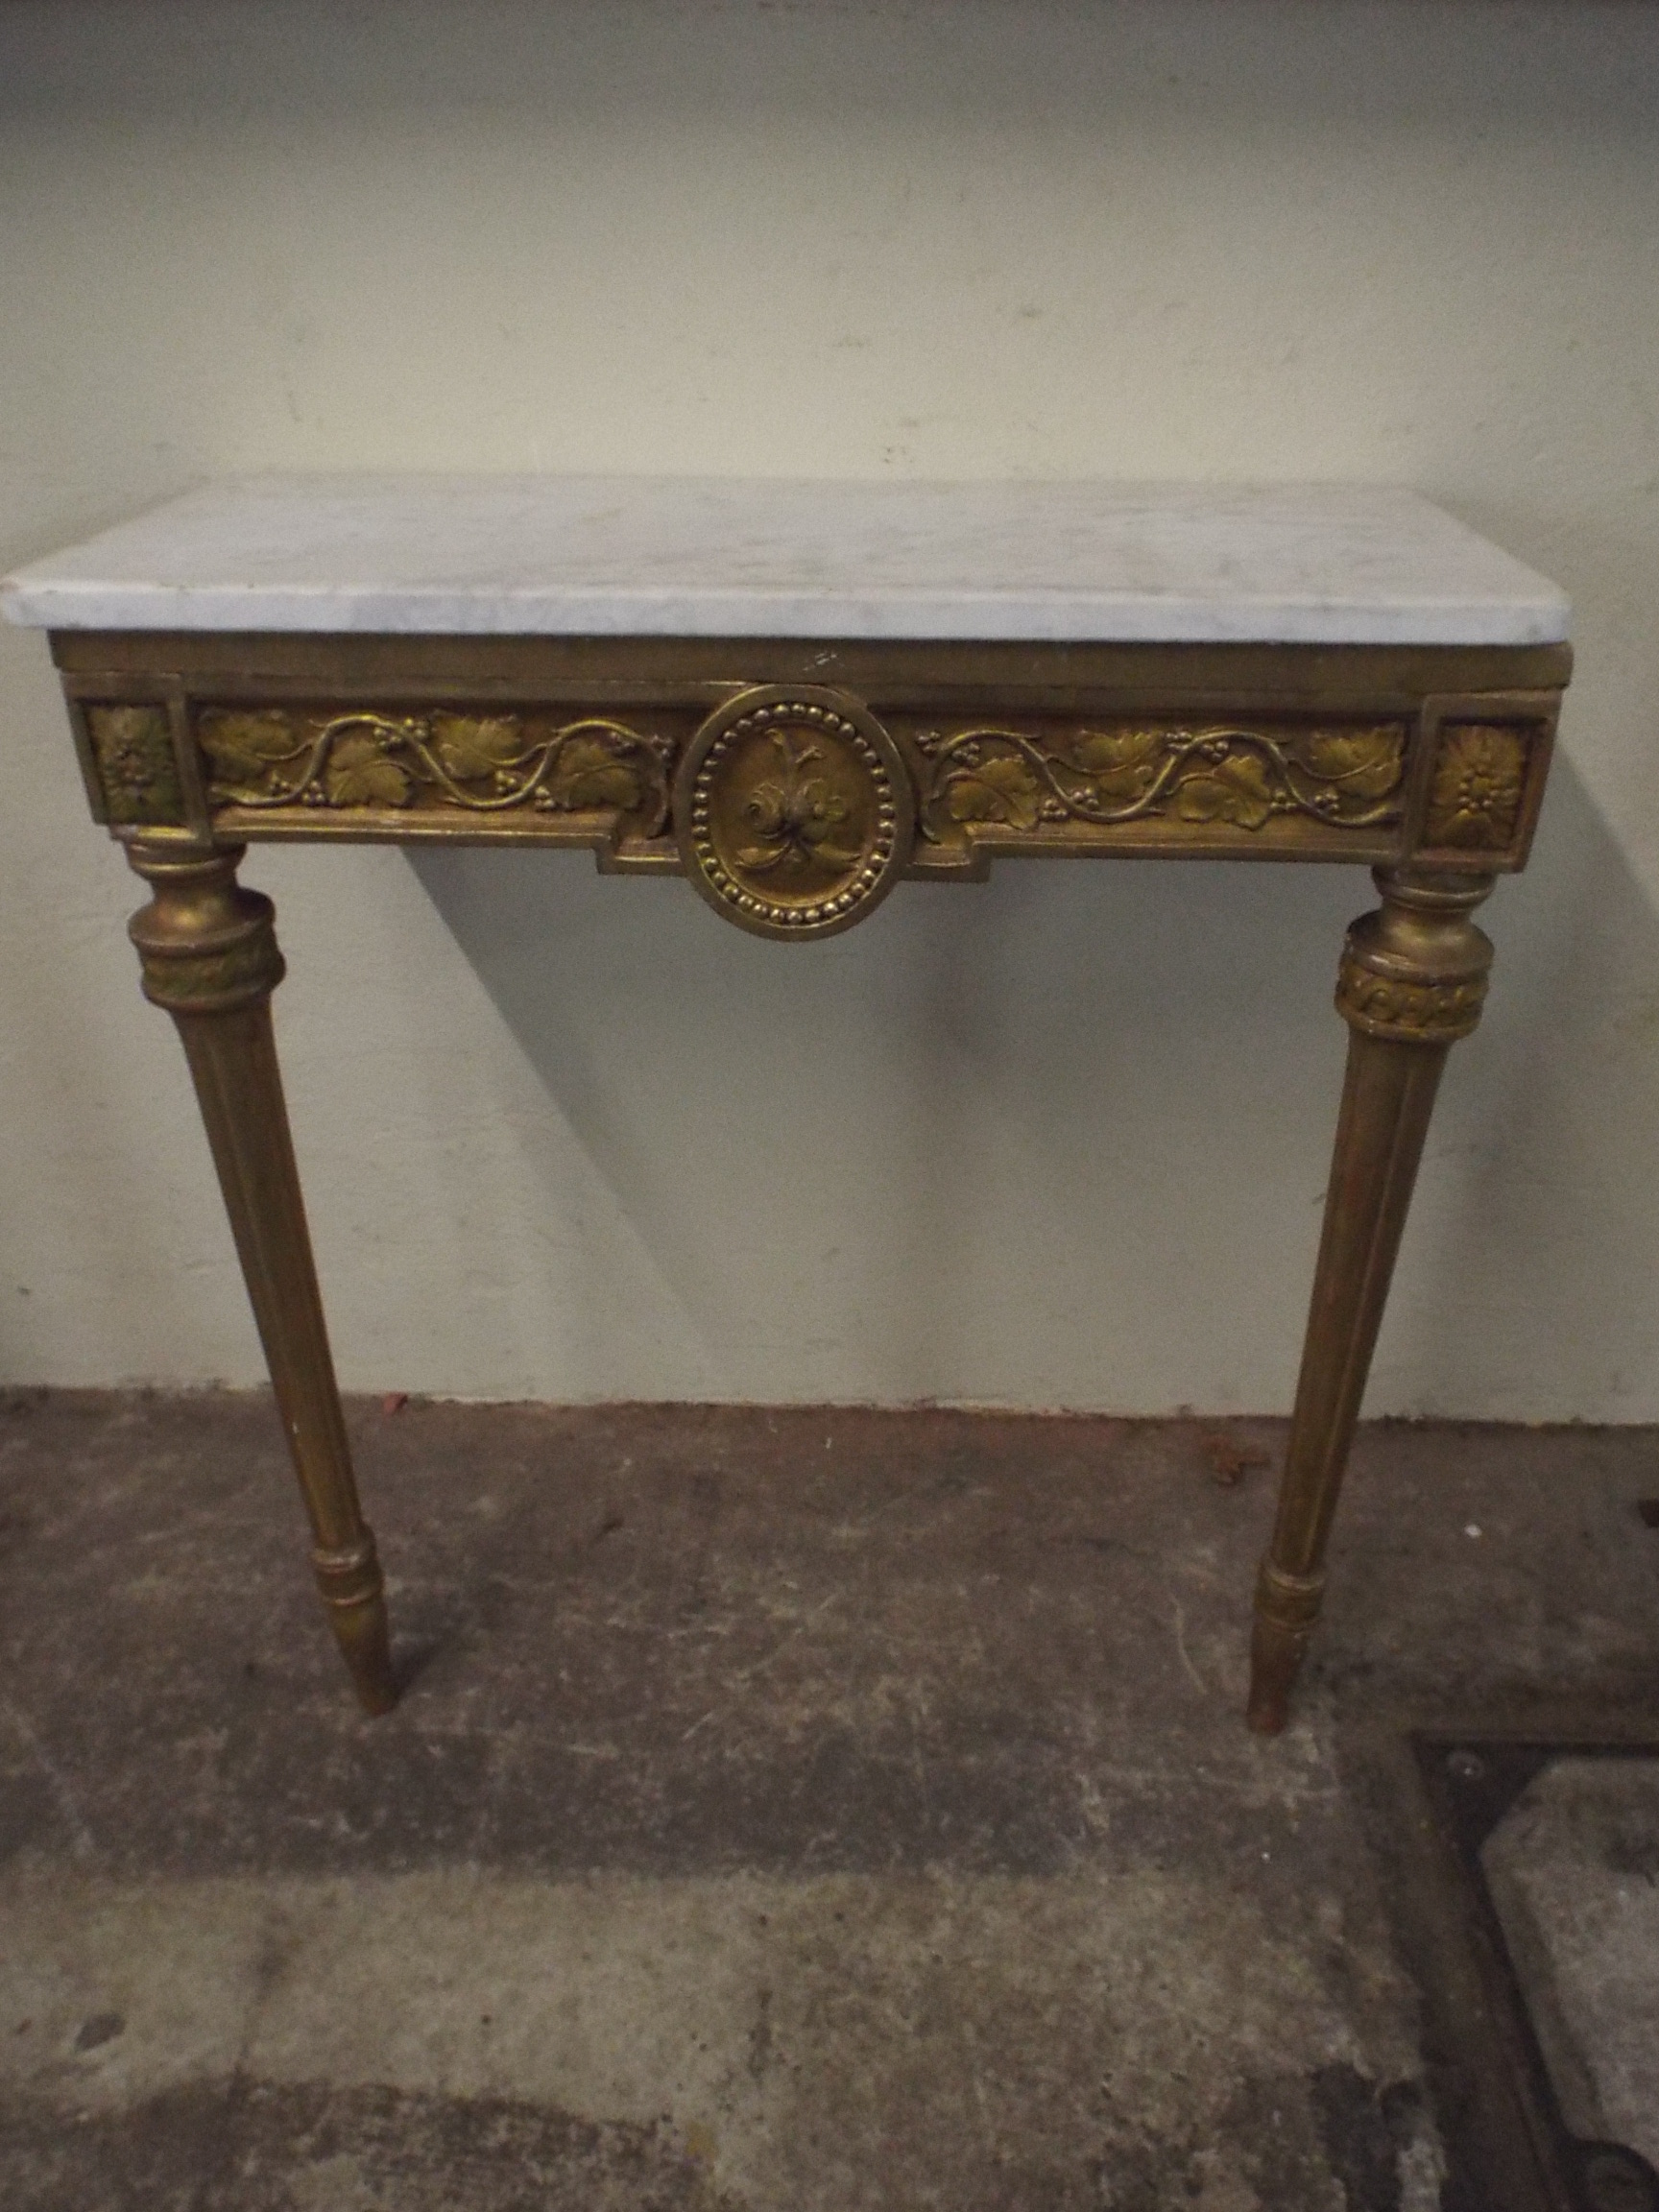 A Marble Topped Gilt Console Table with Moulded Frieze and Turned Tapering Reeded Legs.